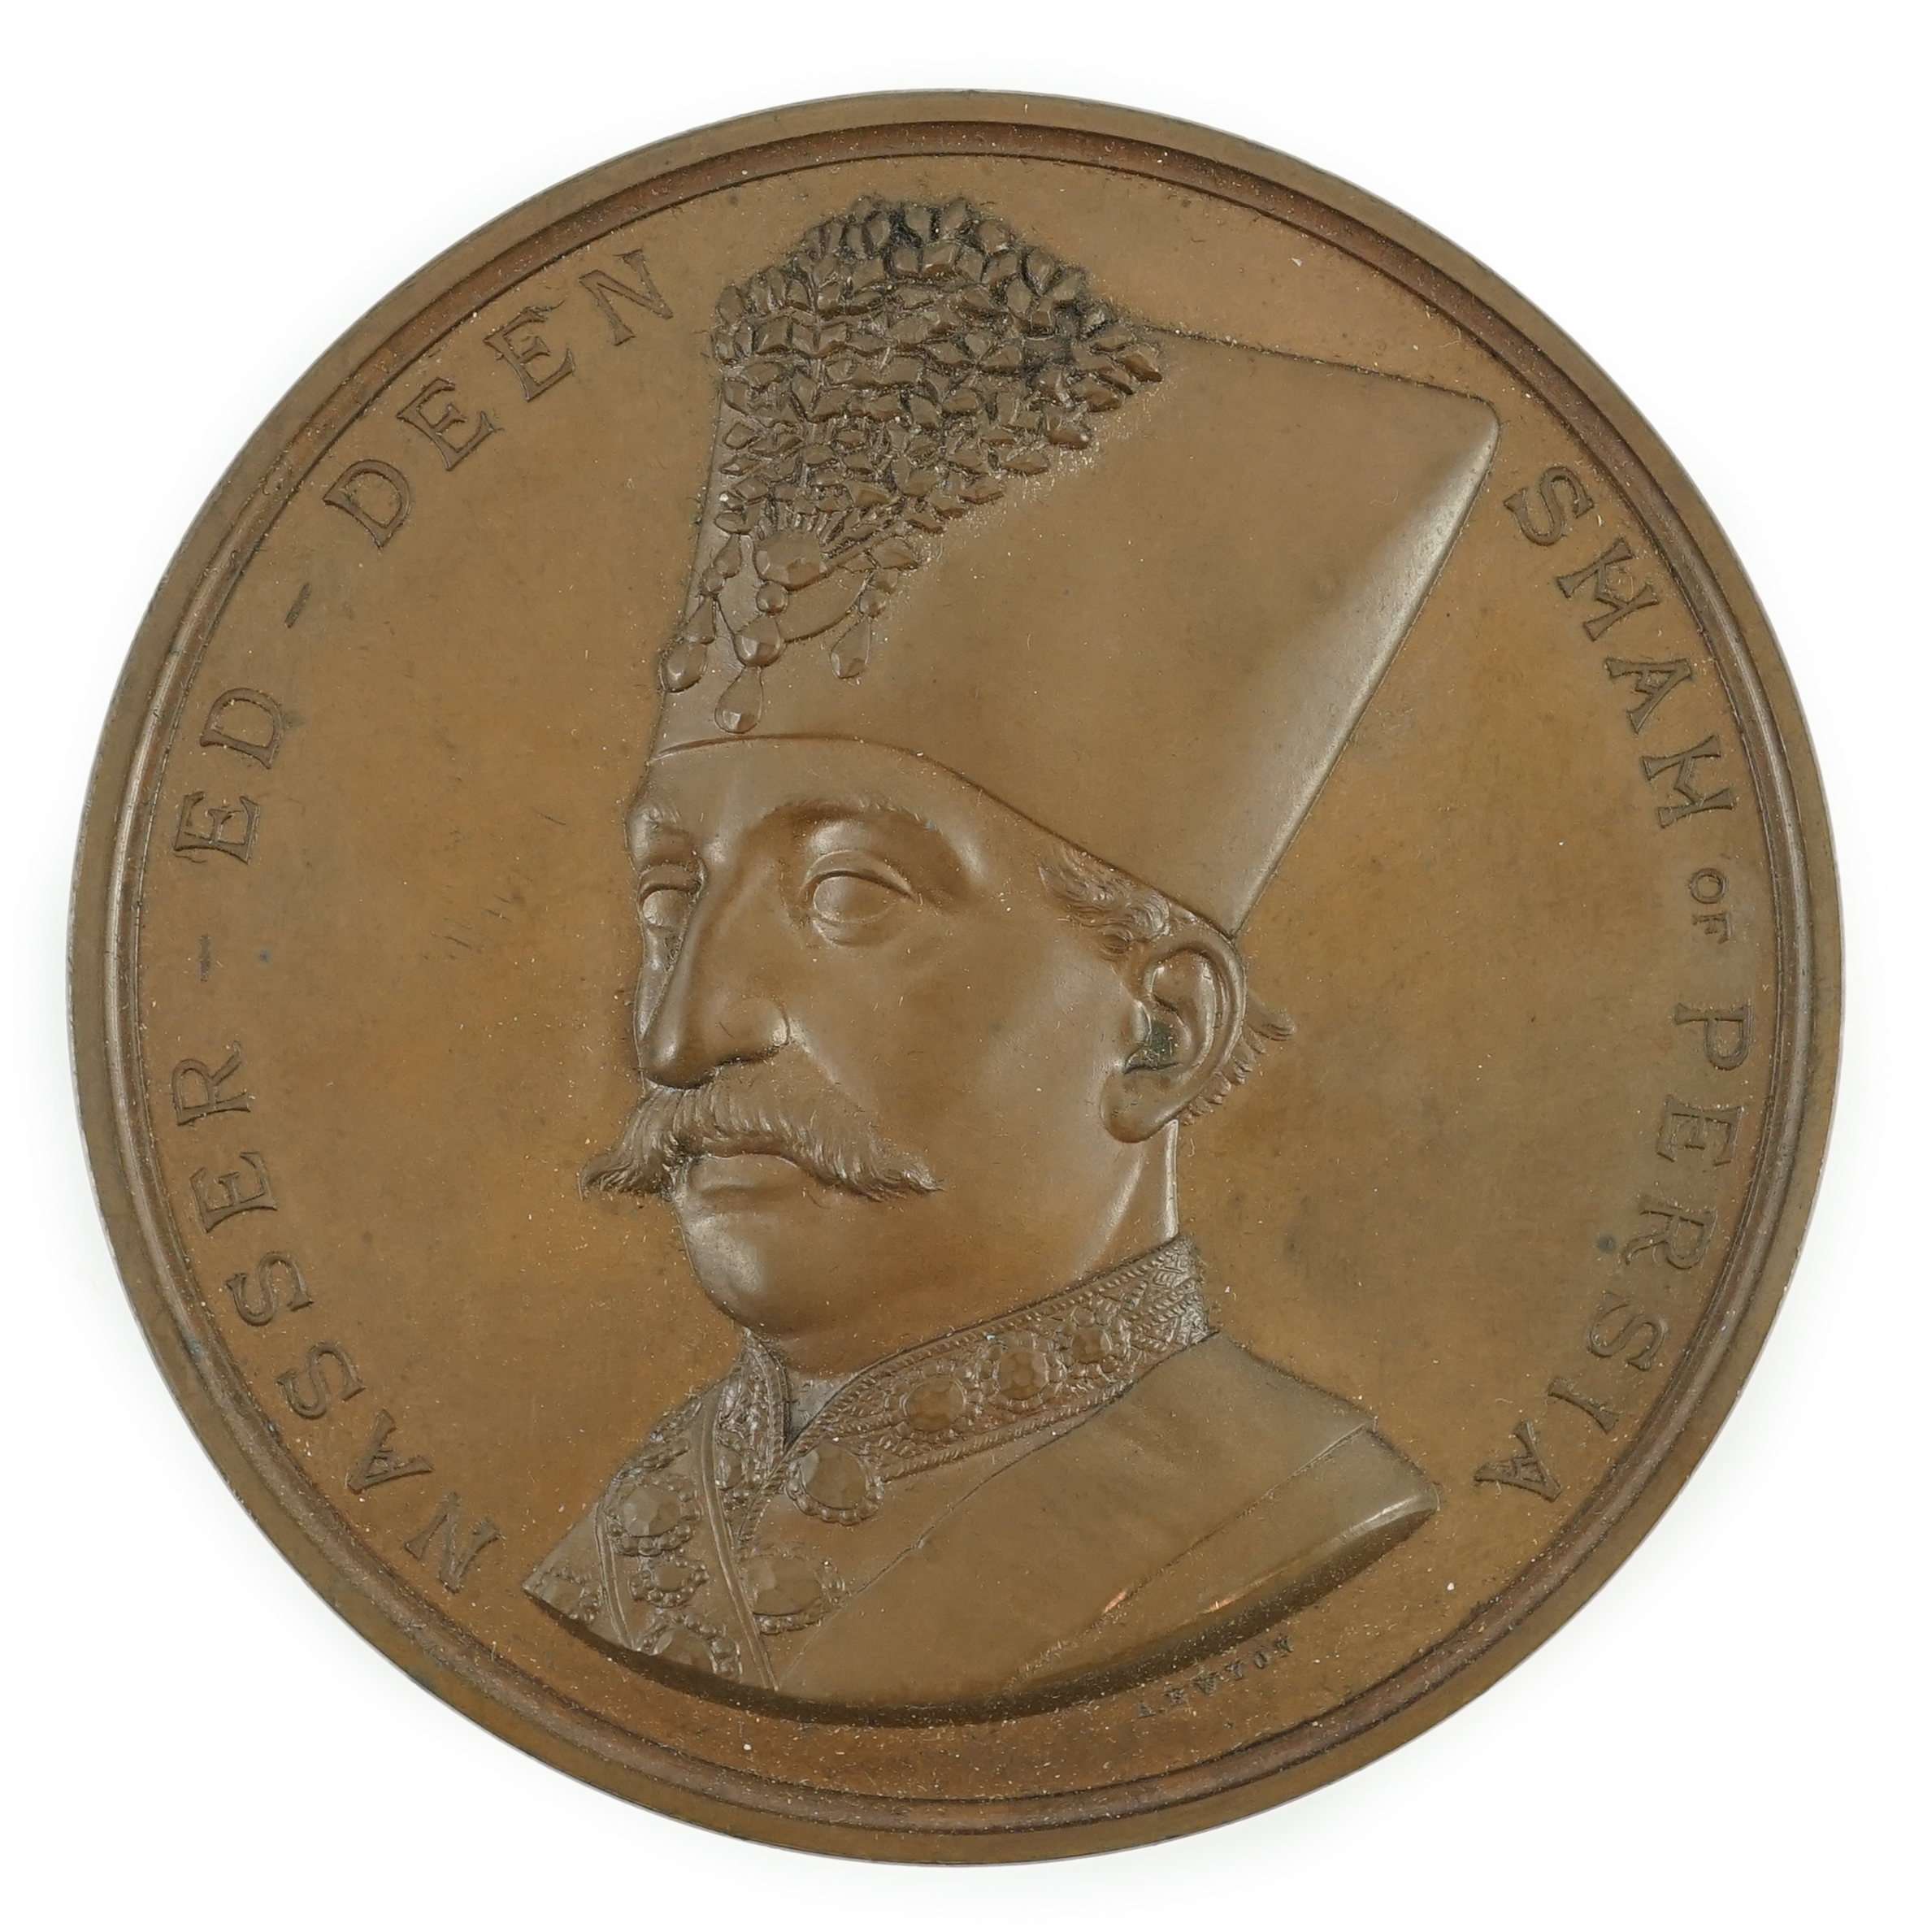 British commemorative medals – Victorian bronze medal marking the Visit of Nasser Ed Deen ‘Shah of Persia’ to London 1873, by A.B. Wyon, leather case